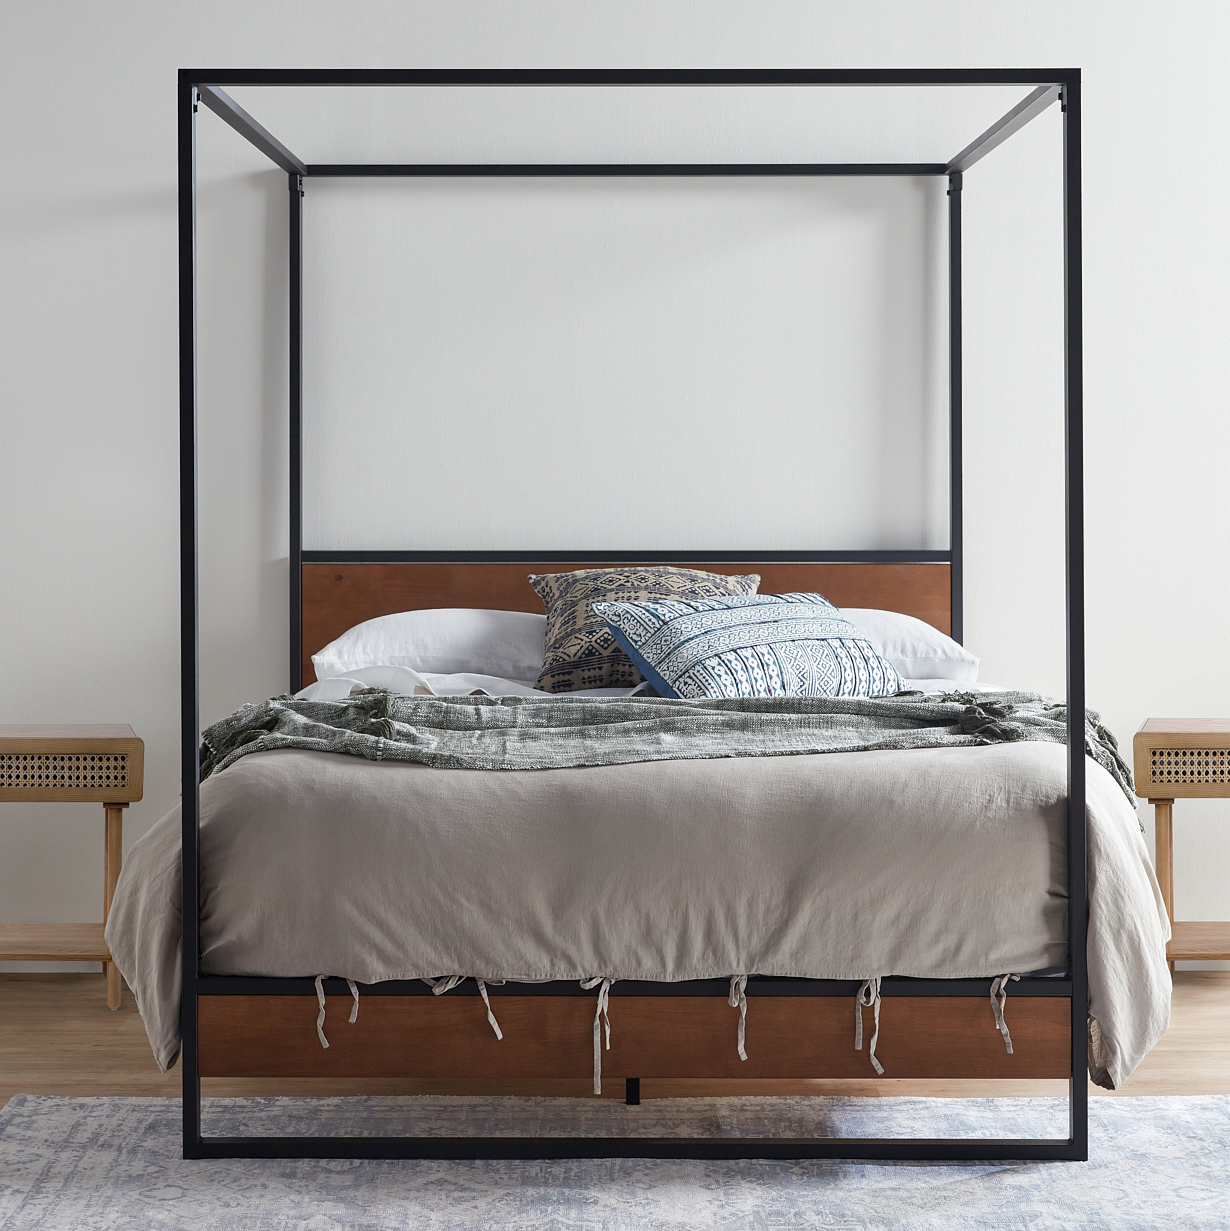 Metal Canopy Four Poster Bed, How To Put A Canopy On Four Poster Bed